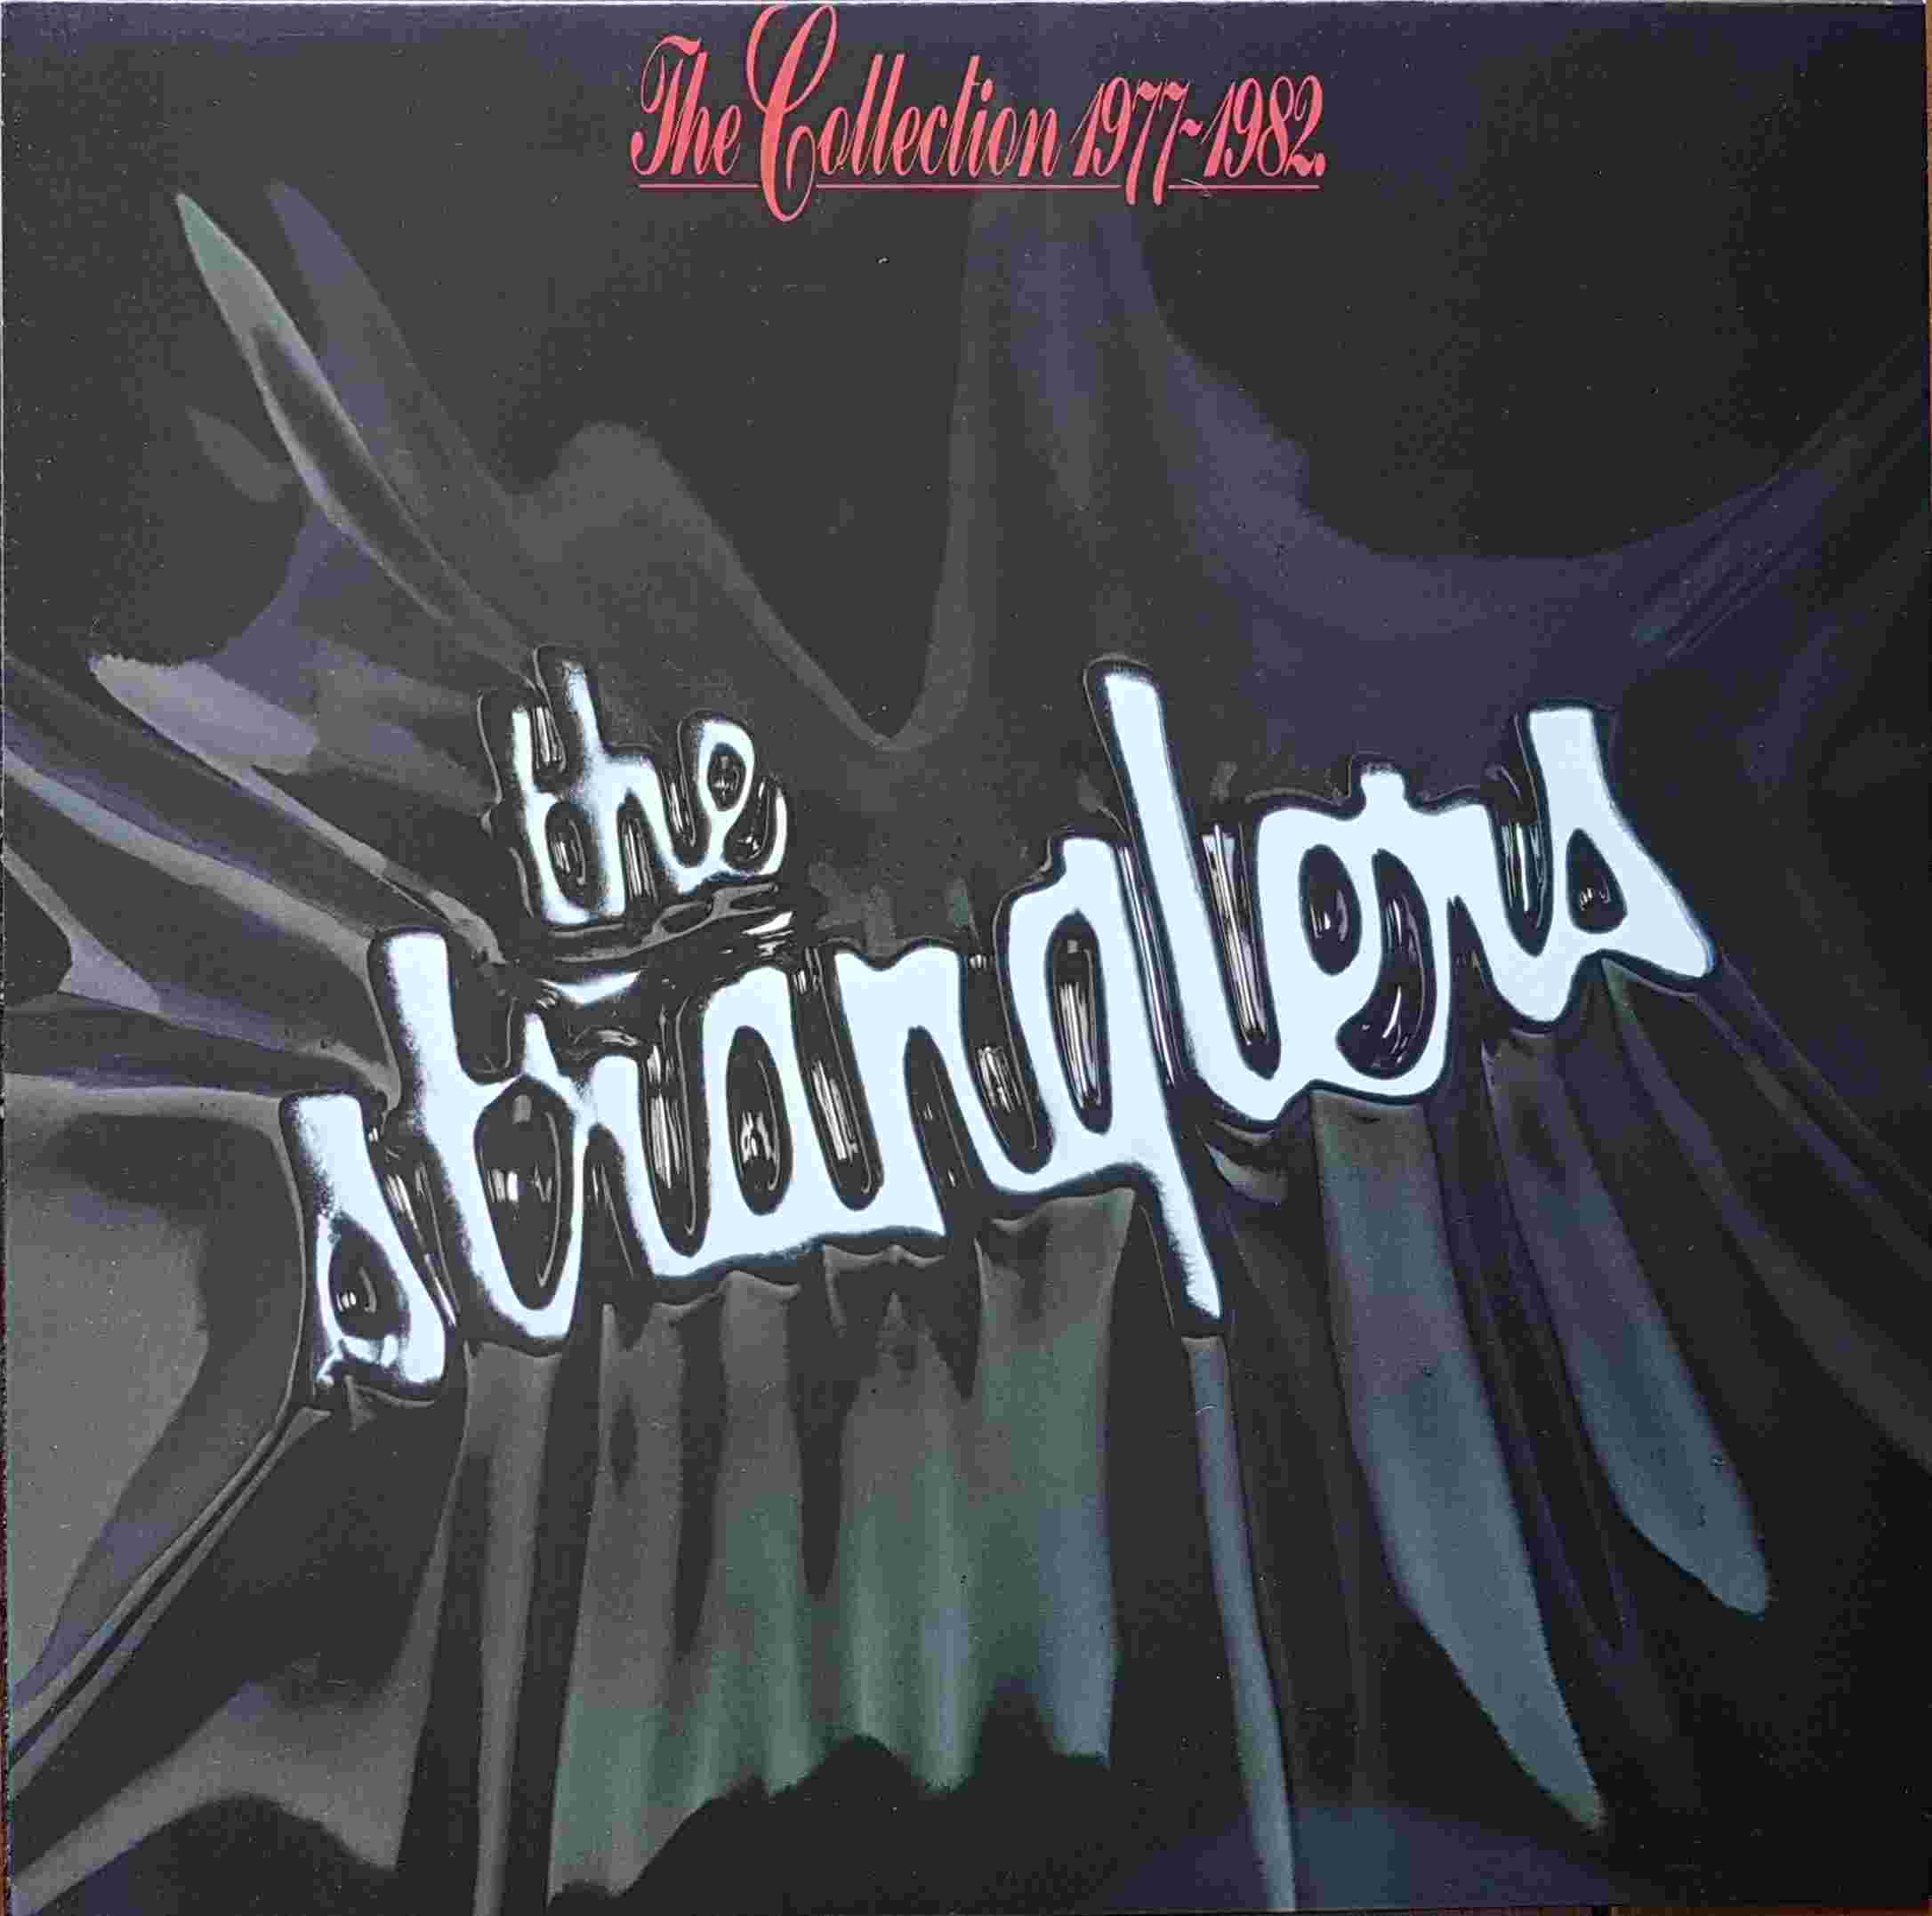 Picture of 1C 064 - 83327 The collection 1977 - 1982 by artist The Stranglers 